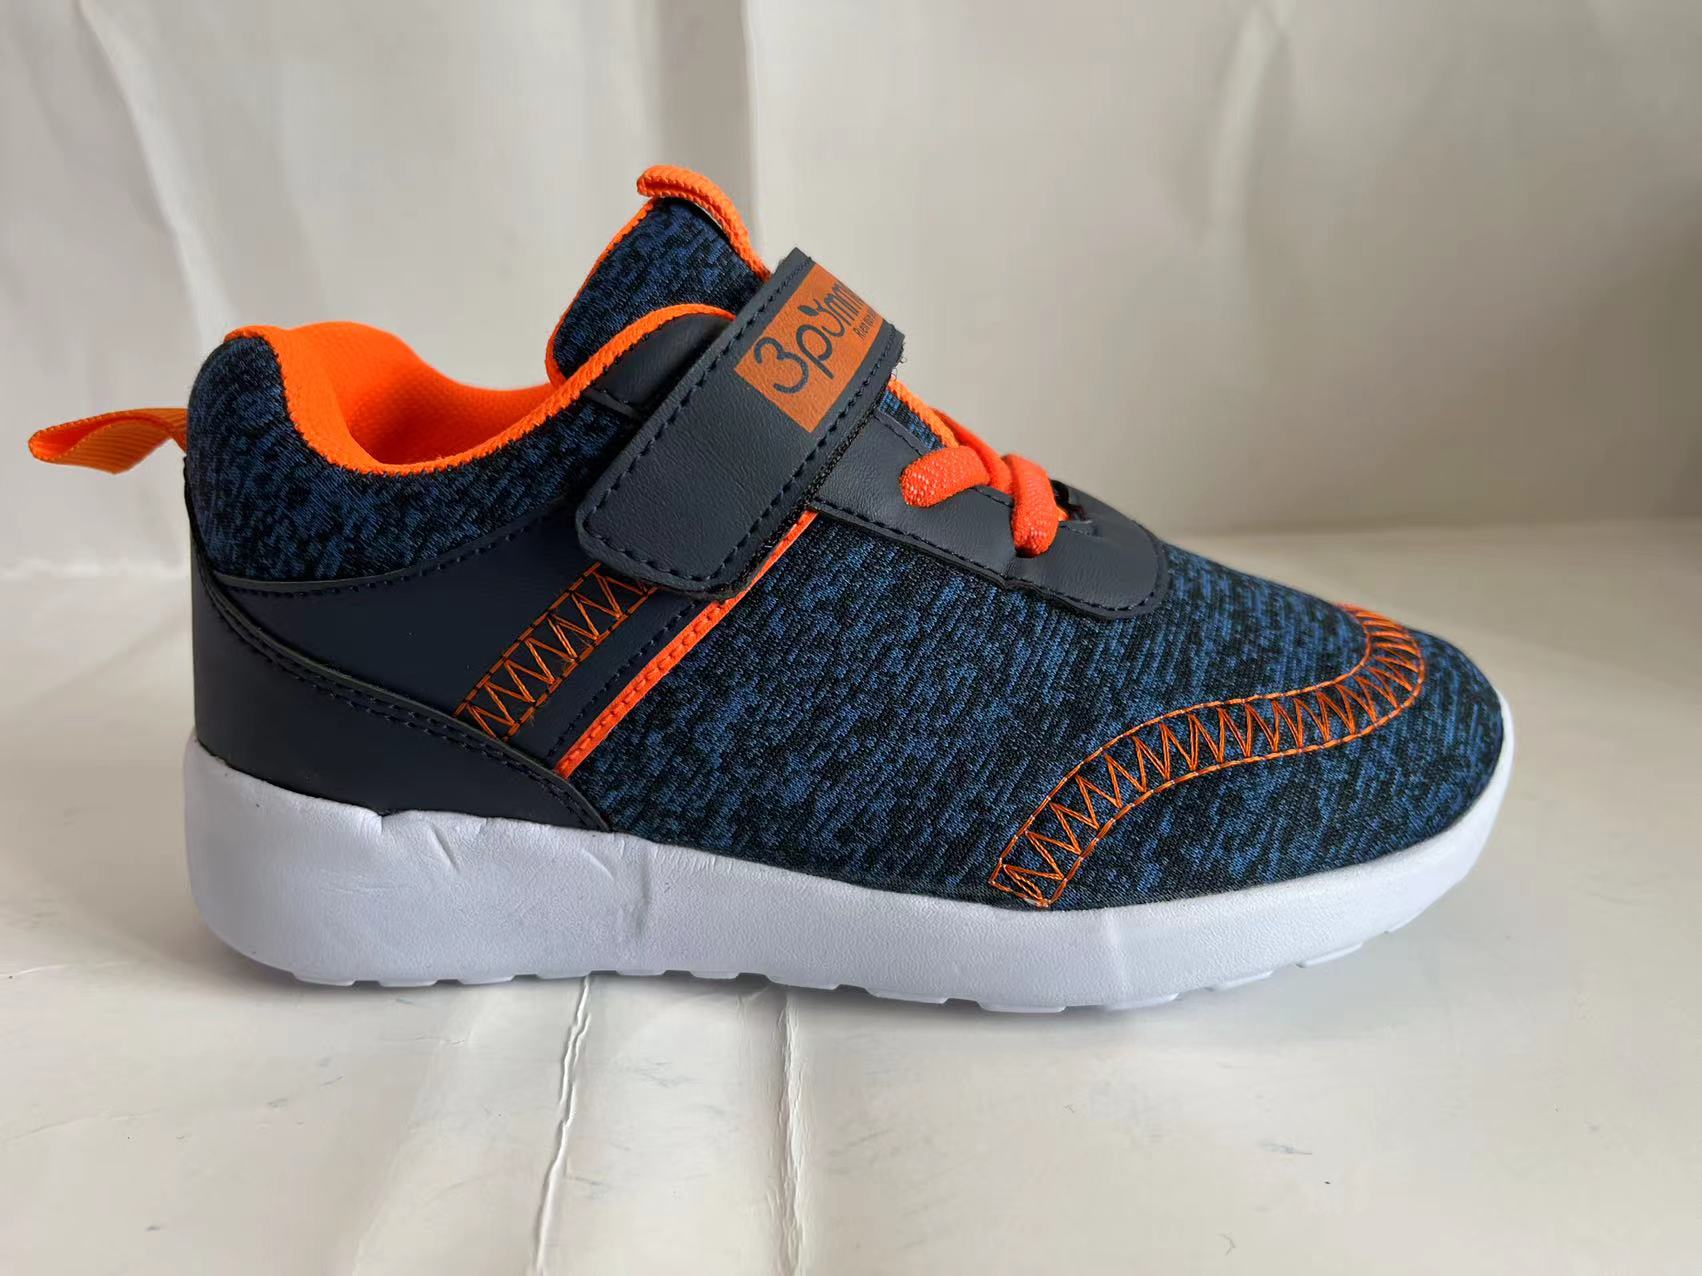 Kids' Boys' Sport Shoes Sneakers Running Shoes